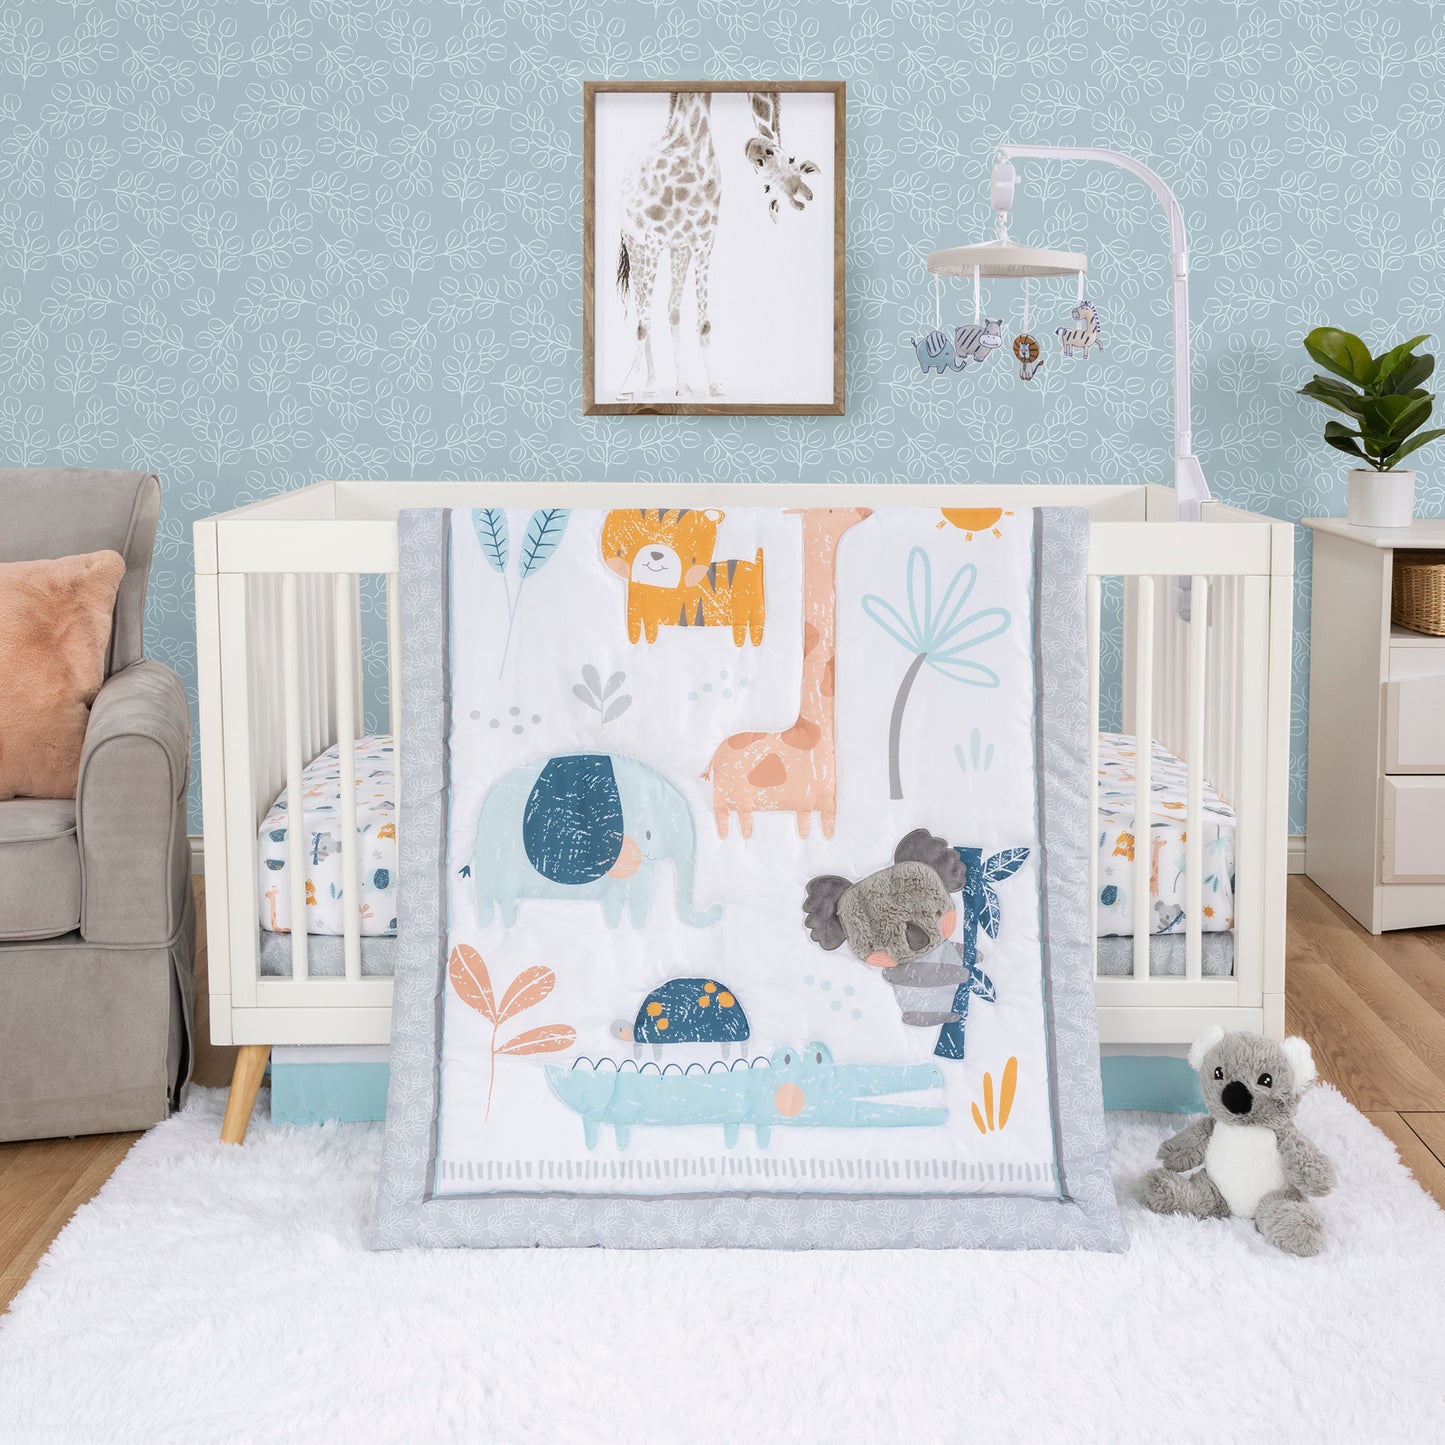 Koala & Friends 4 Piece Bedding Set by Sammy & Lou® - stylized room. This design features a sweet appliqued plush Koala surrounded by friends. The soft colors of yellow, orange, teal and blue will surely add style to any little one's nursery.